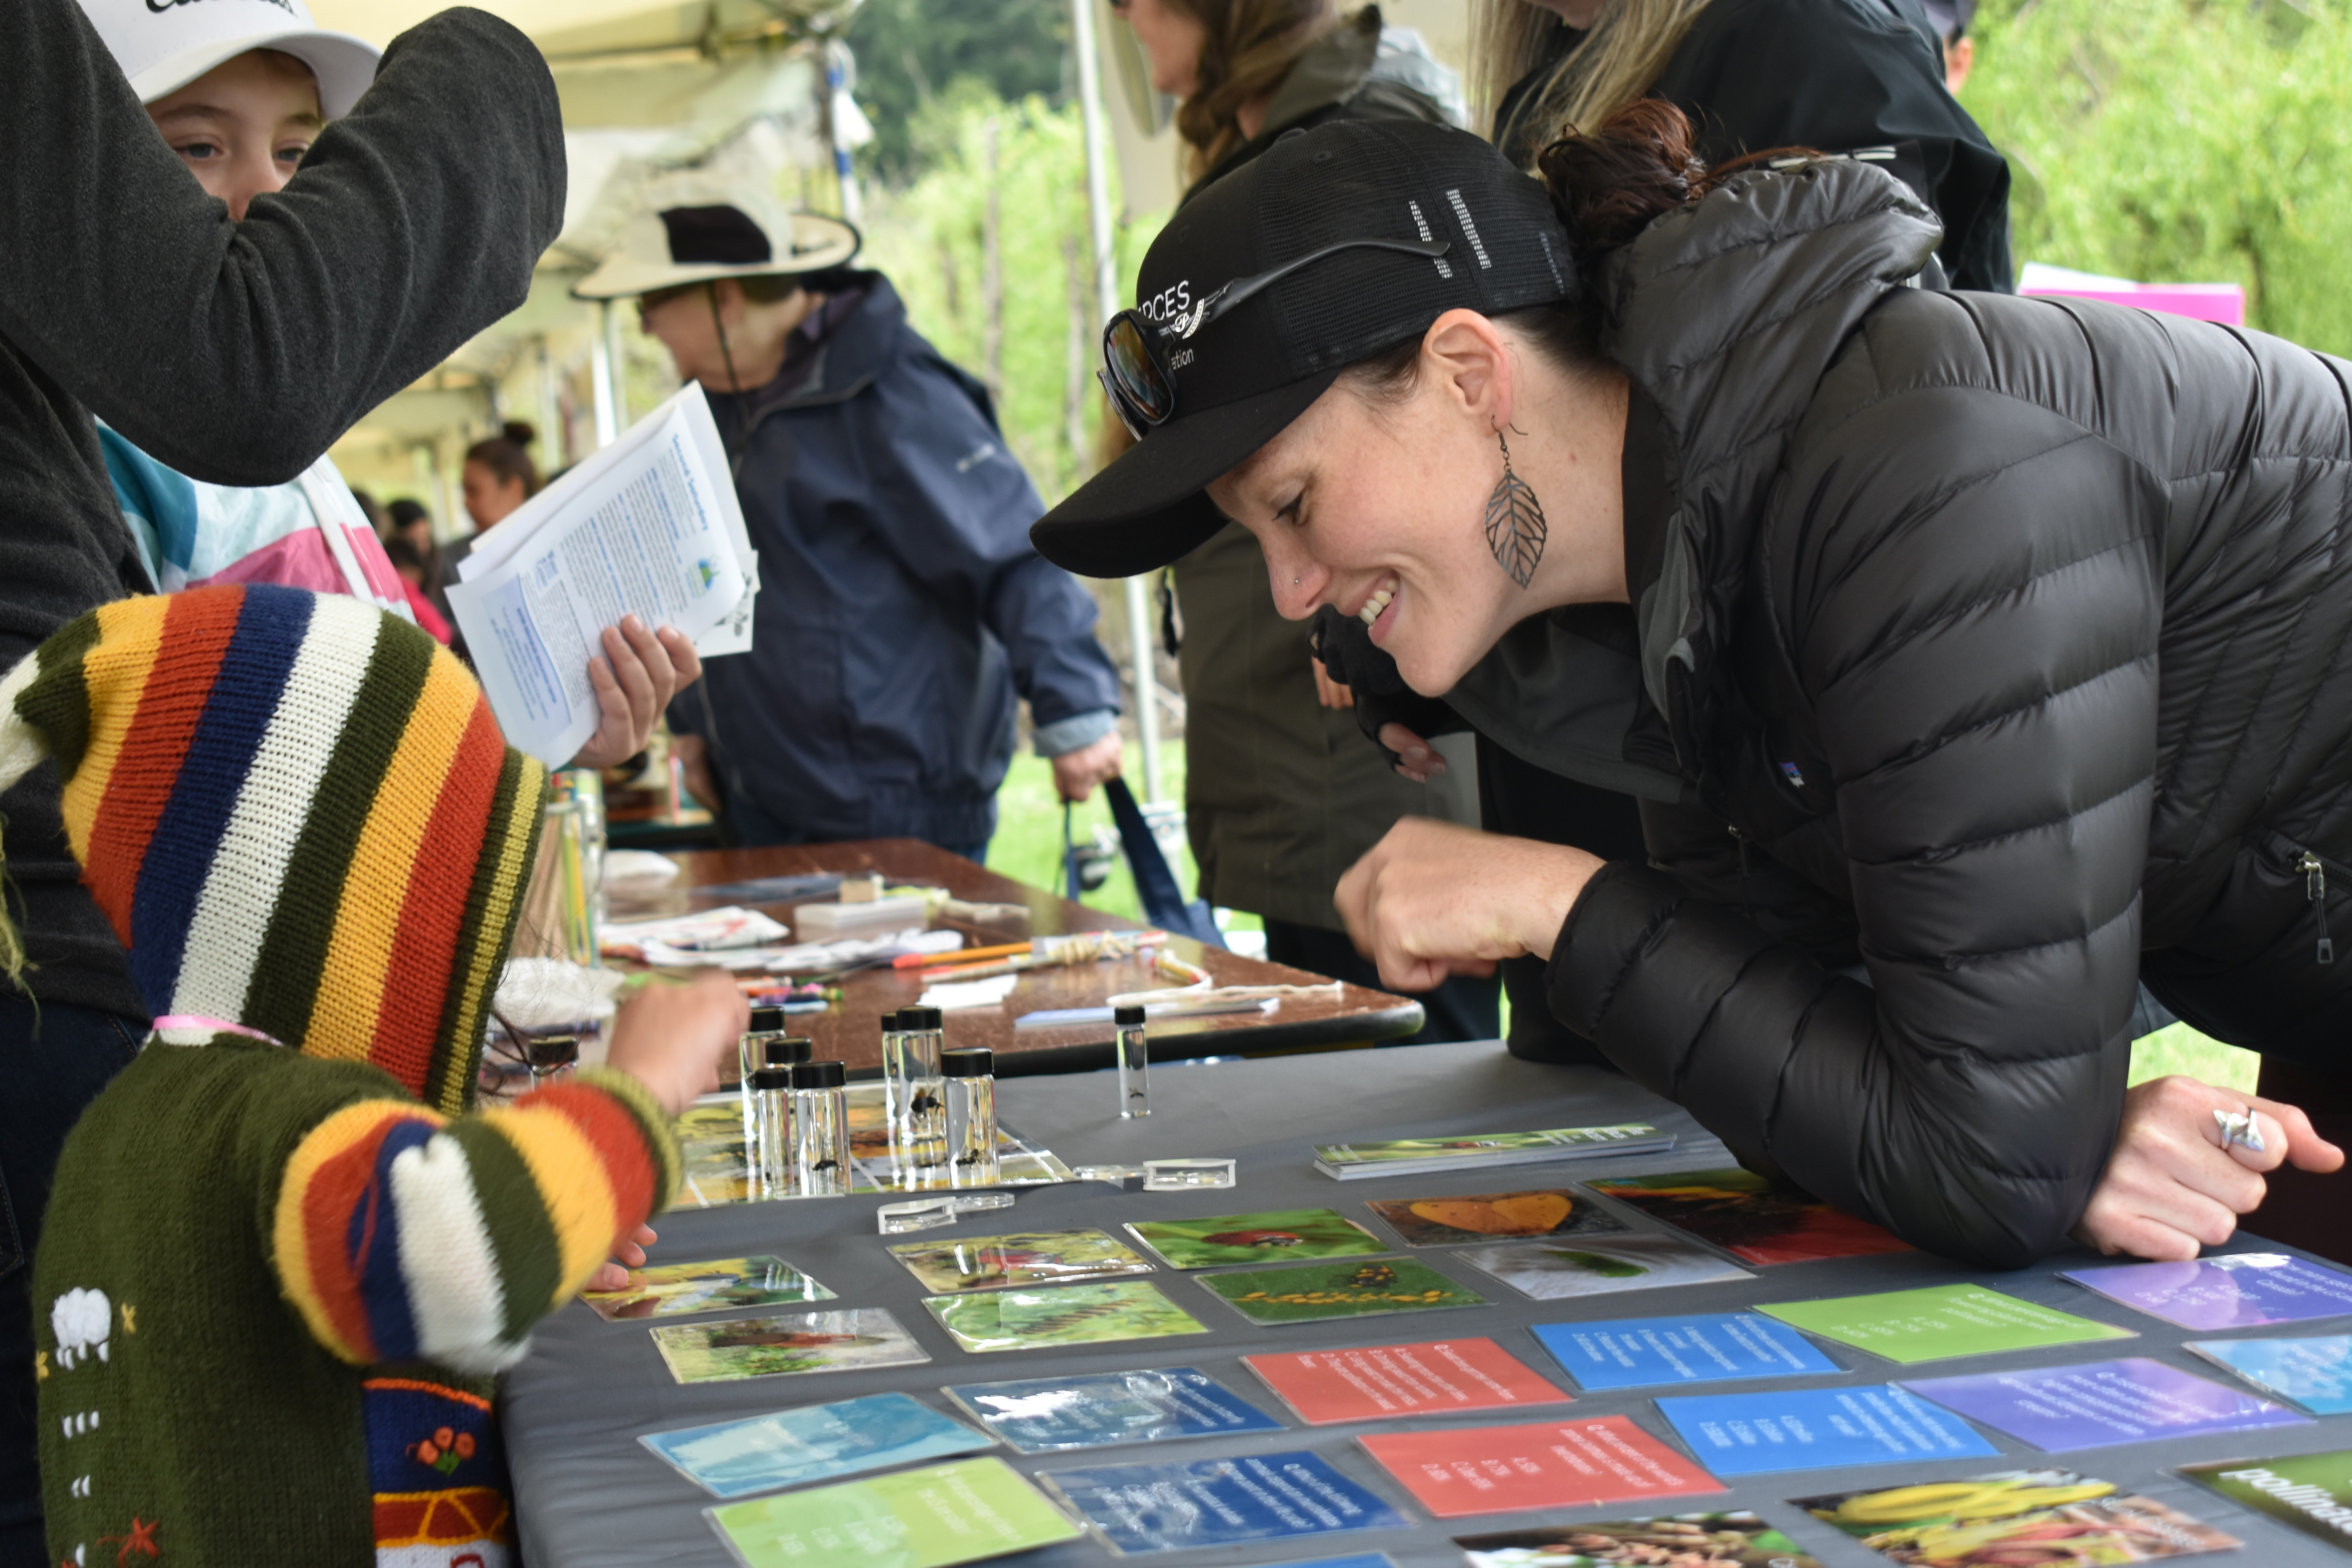 A smiling woman wearing a black coat and a black Xerces Society hat leans over a table. On the other side of the table, a kid with a colorful hoodie reaches for an assortment of small glass vials containing bee specimens. The woman and the kid are looking at the same vials and appear to be talking.